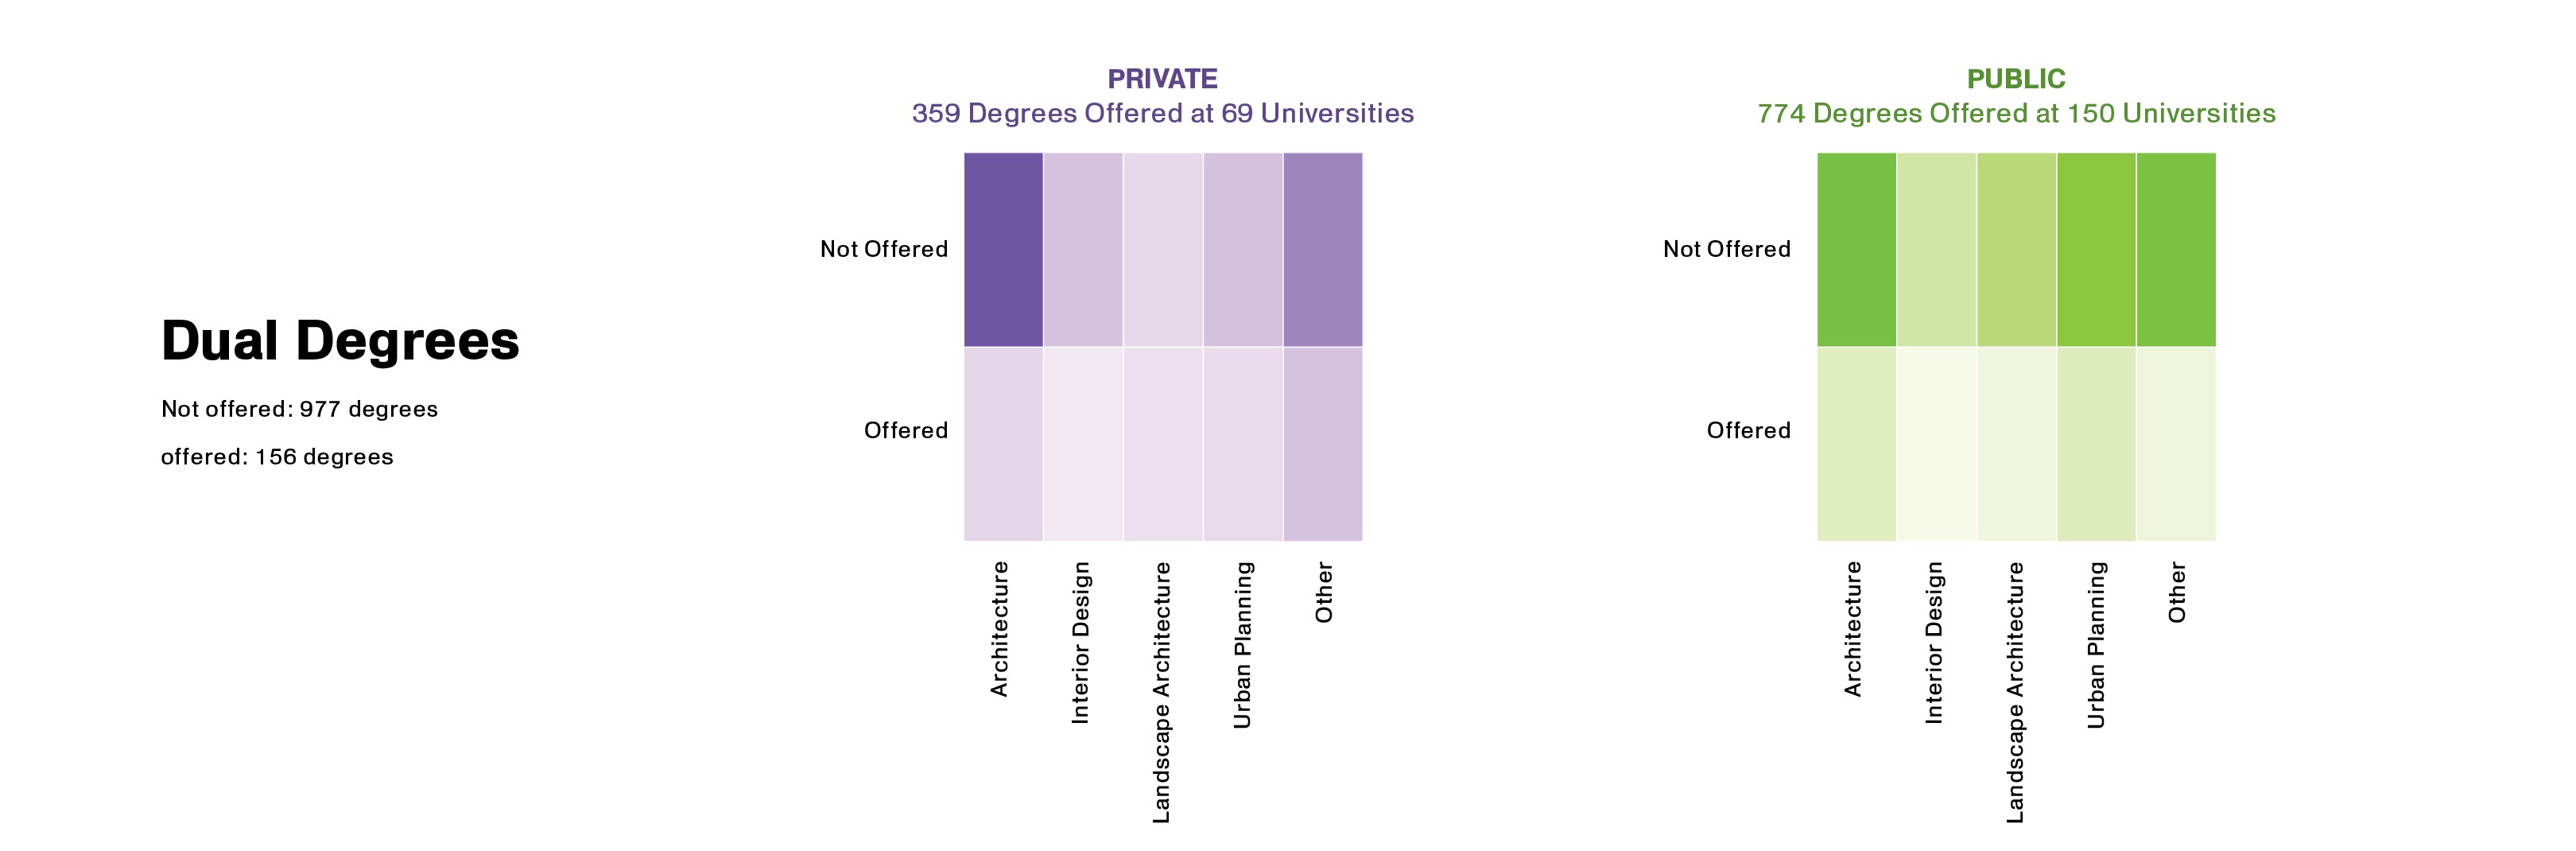 Dual Degrees in Private and Public Universities 